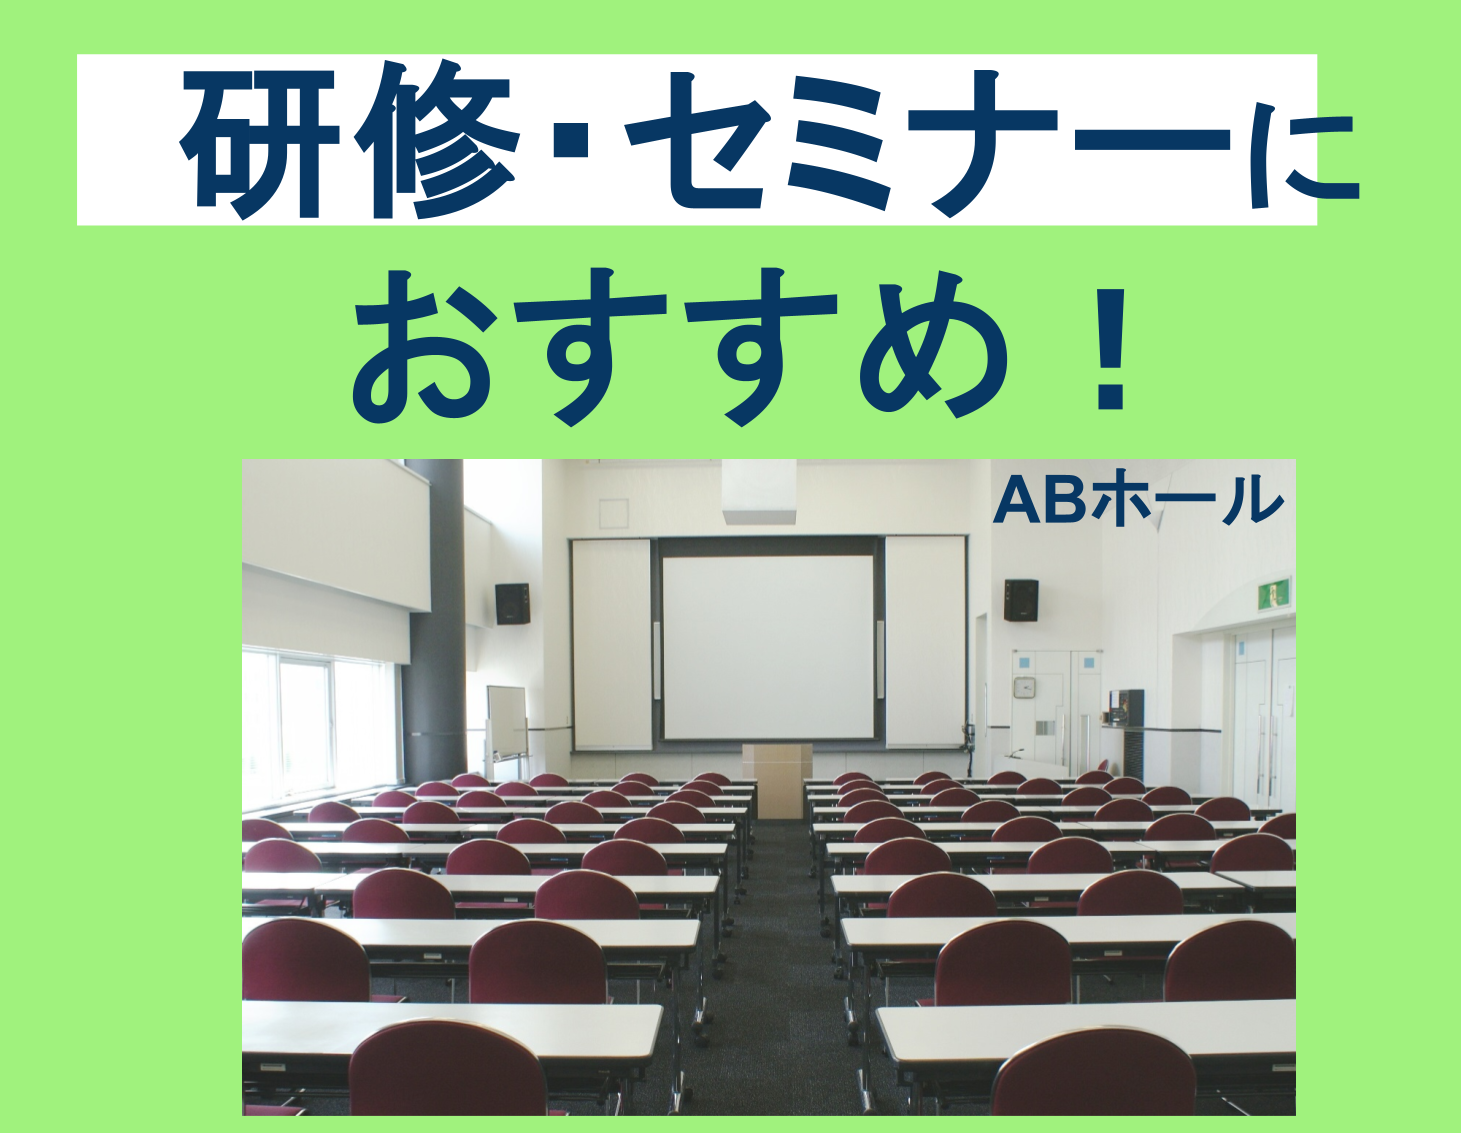 ABホール